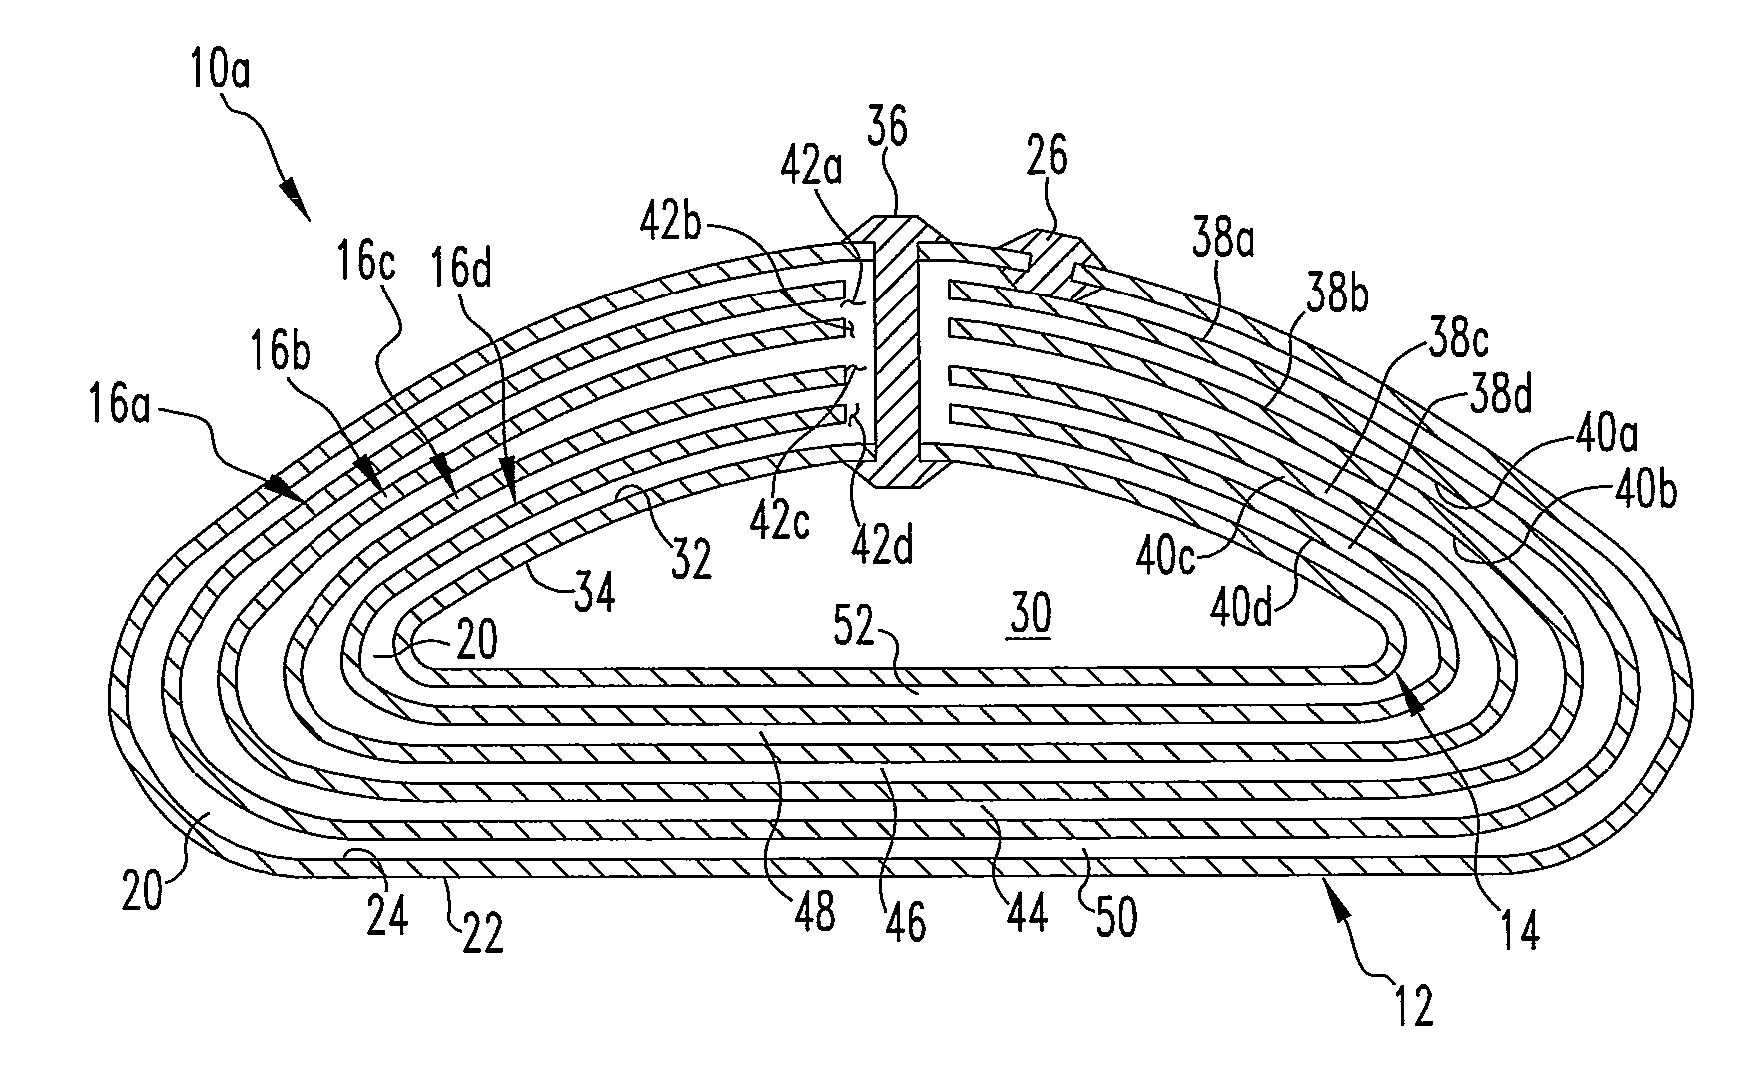 Breast implant with low coefficient of friction between internal shells in an aqueous fluid environment